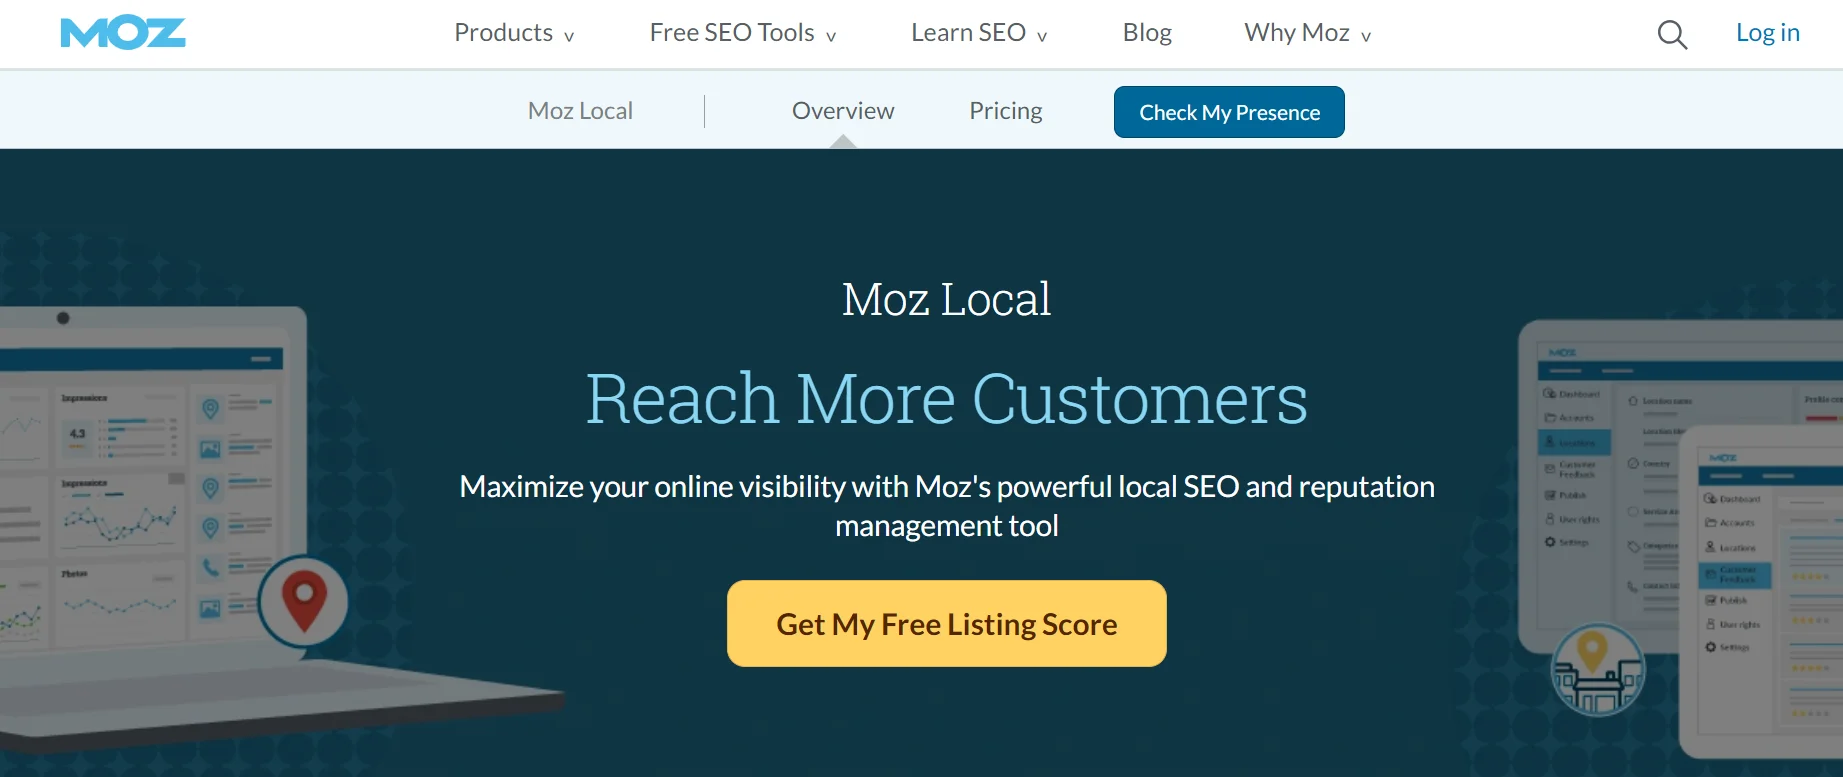 A screenshot of the Moz Local home page